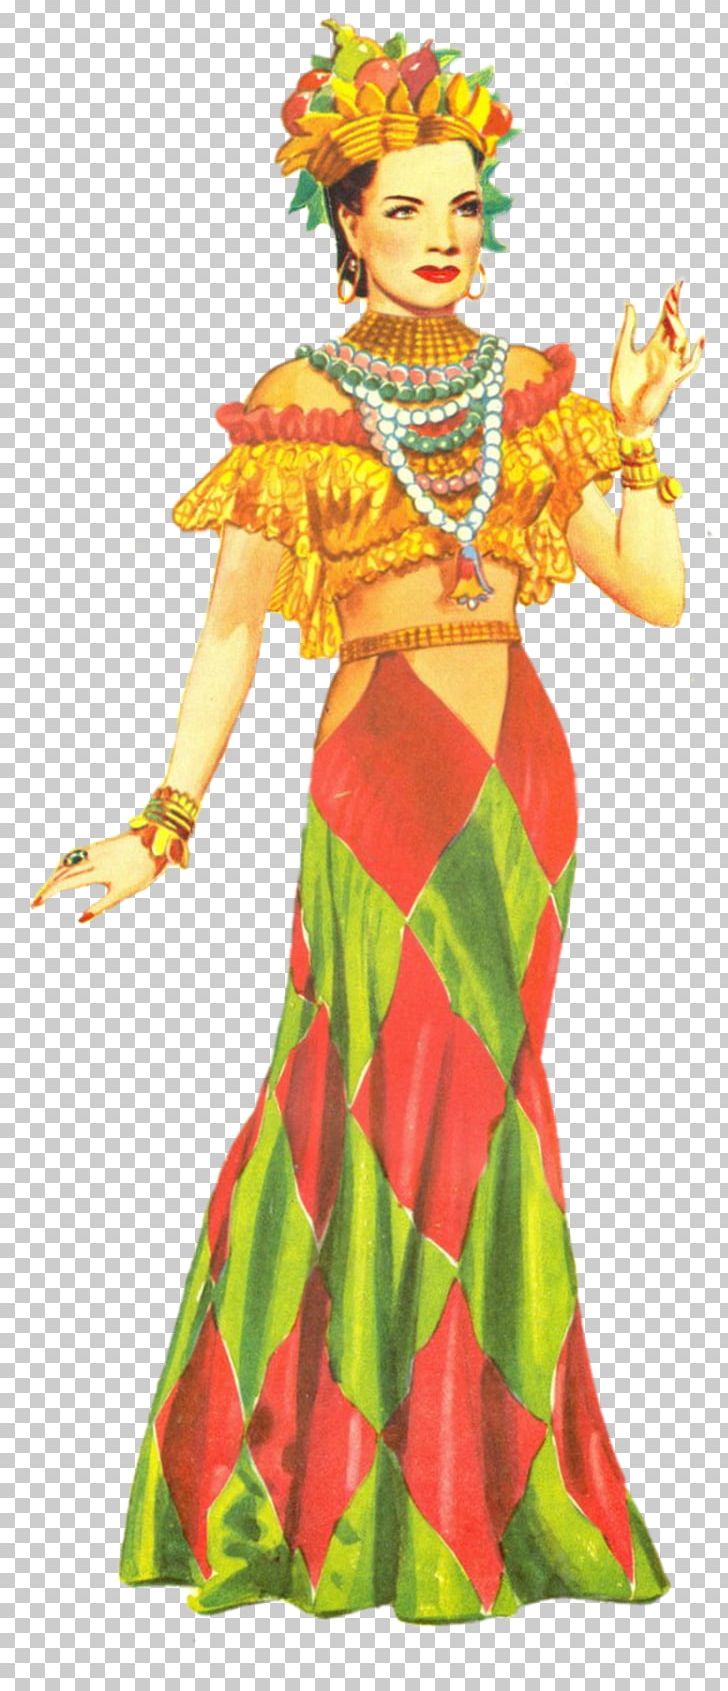 Costume Design Performing Arts The Arts PNG, Clipart, Arts, Costume, Costume Design, Dancer, Others Free PNG Download